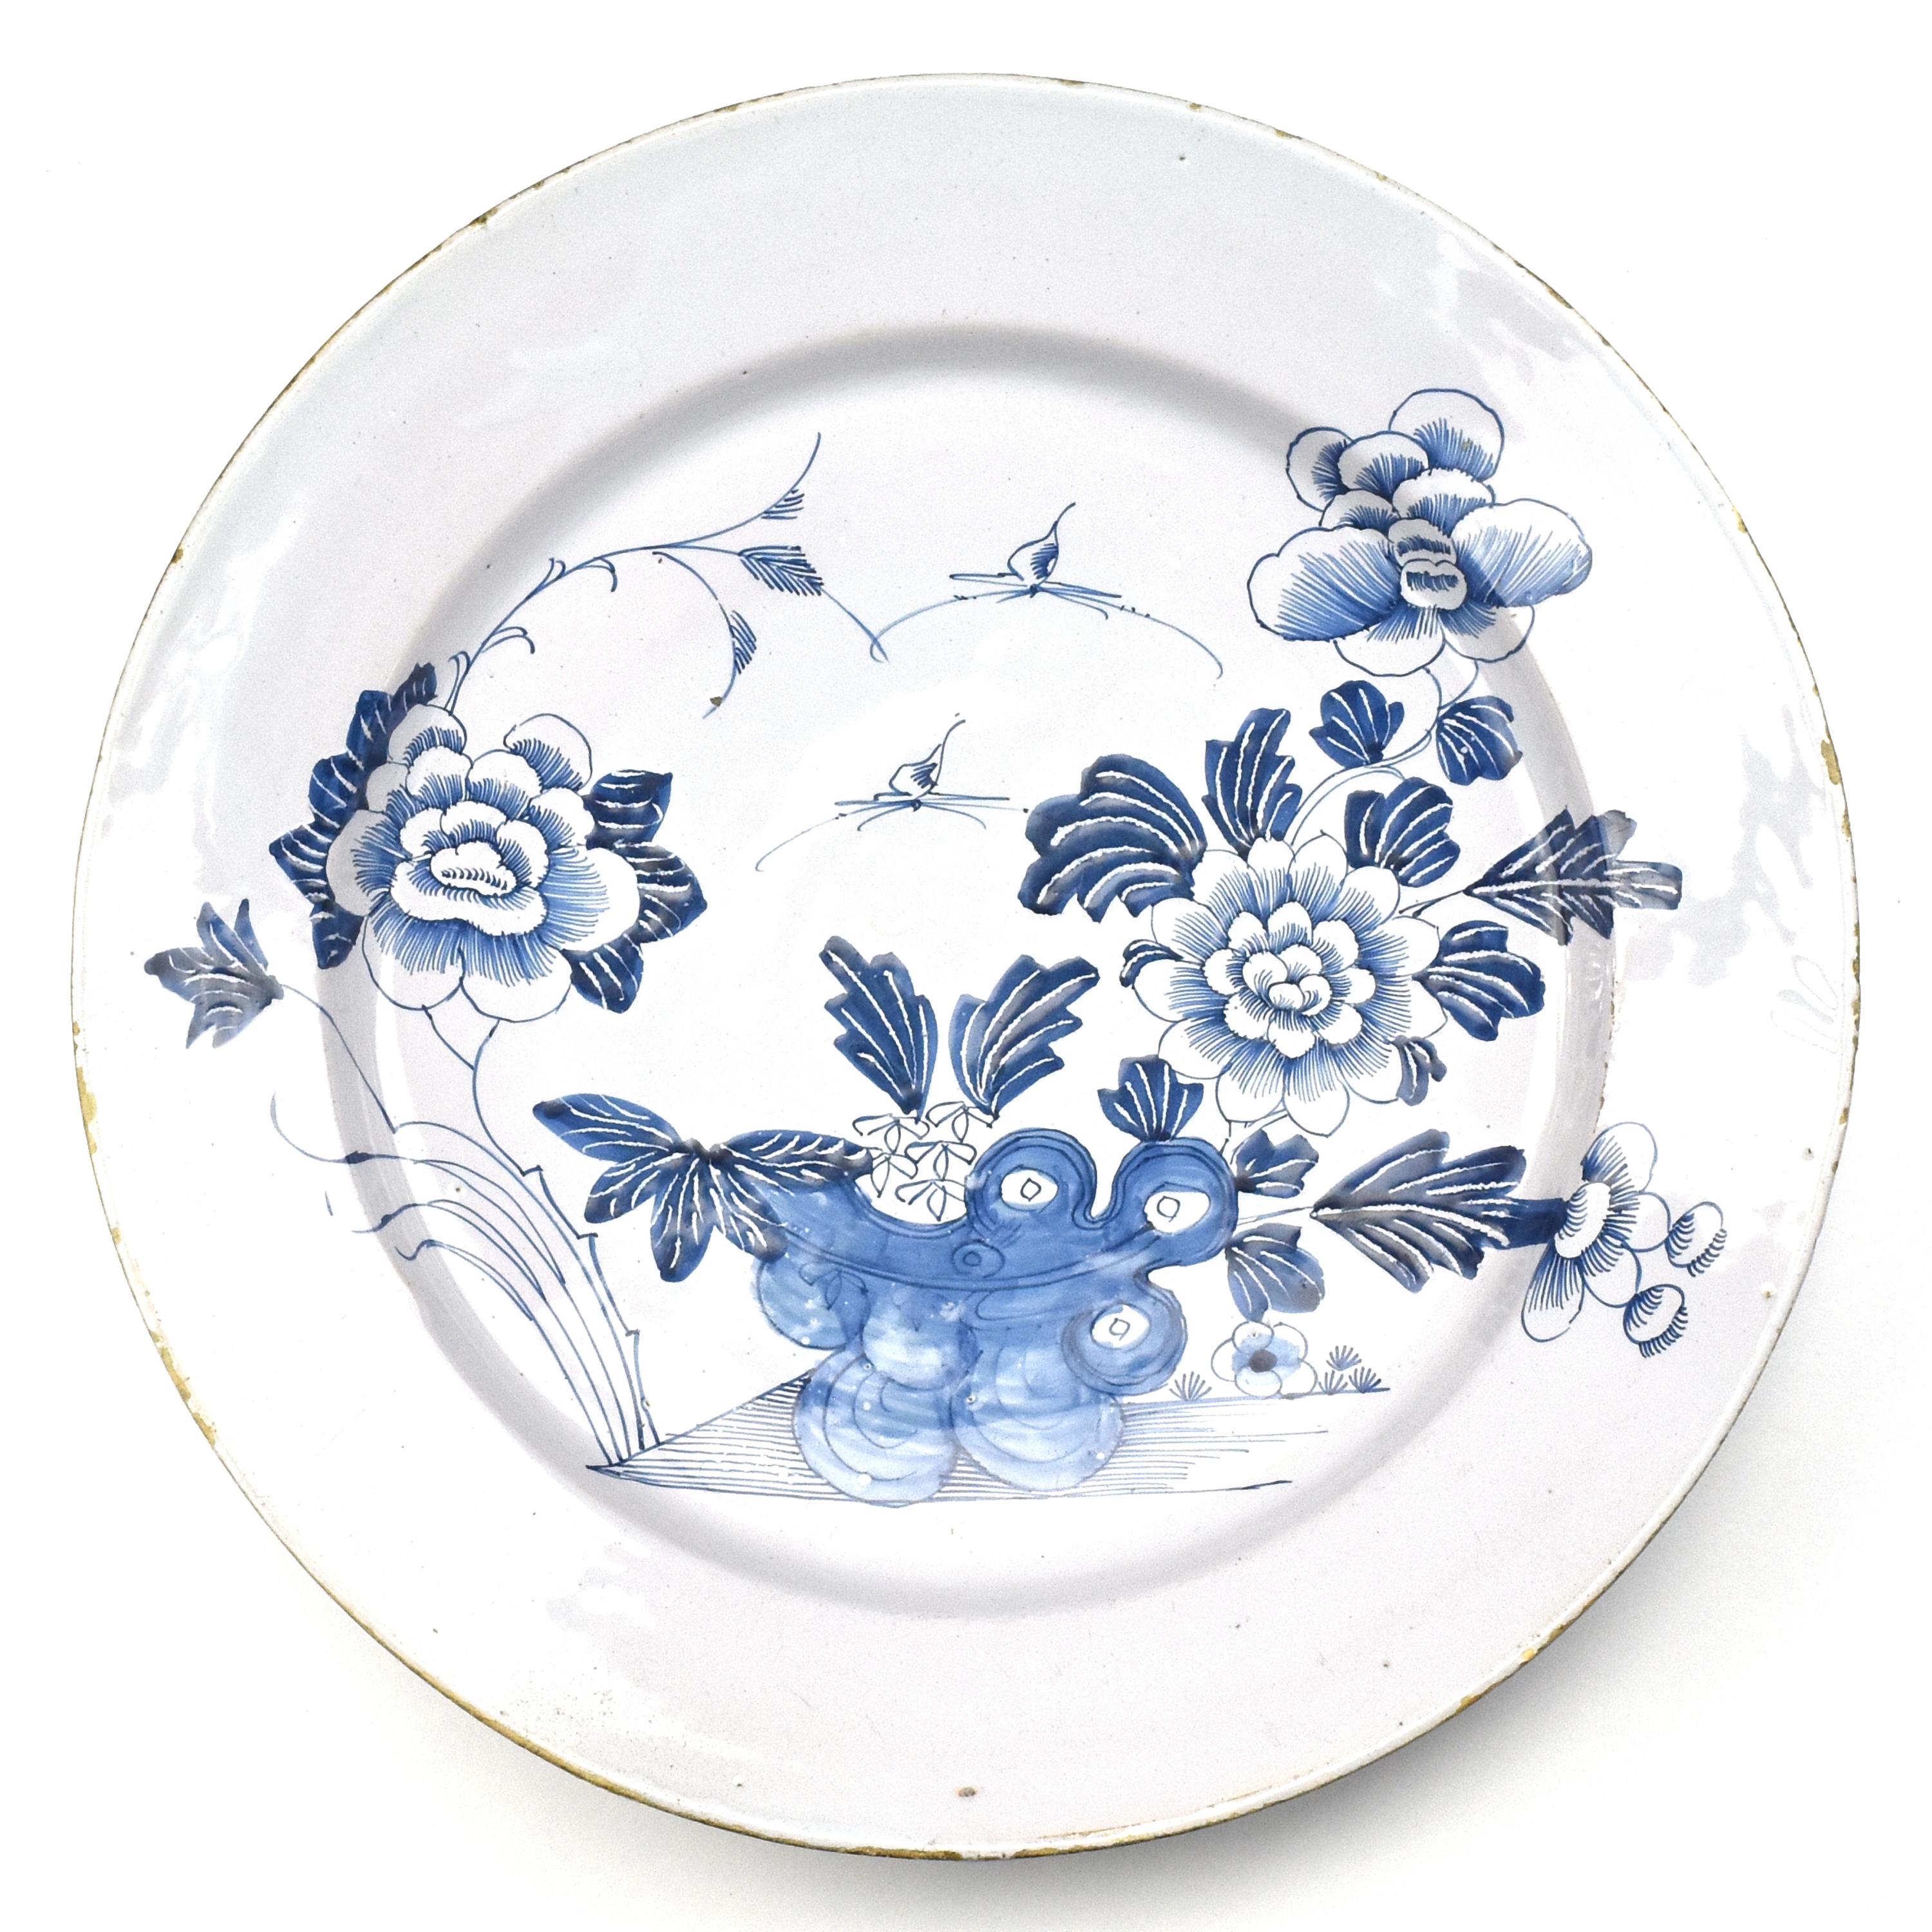 This antique 18th Century Dutch Delft Chinoserie plate is a captivating piece of ceramic art that reflects the outstanding craftsmanship and cultural exchange of its time. Originating from the 18th century Dutch Delftware tradition, this plate is a